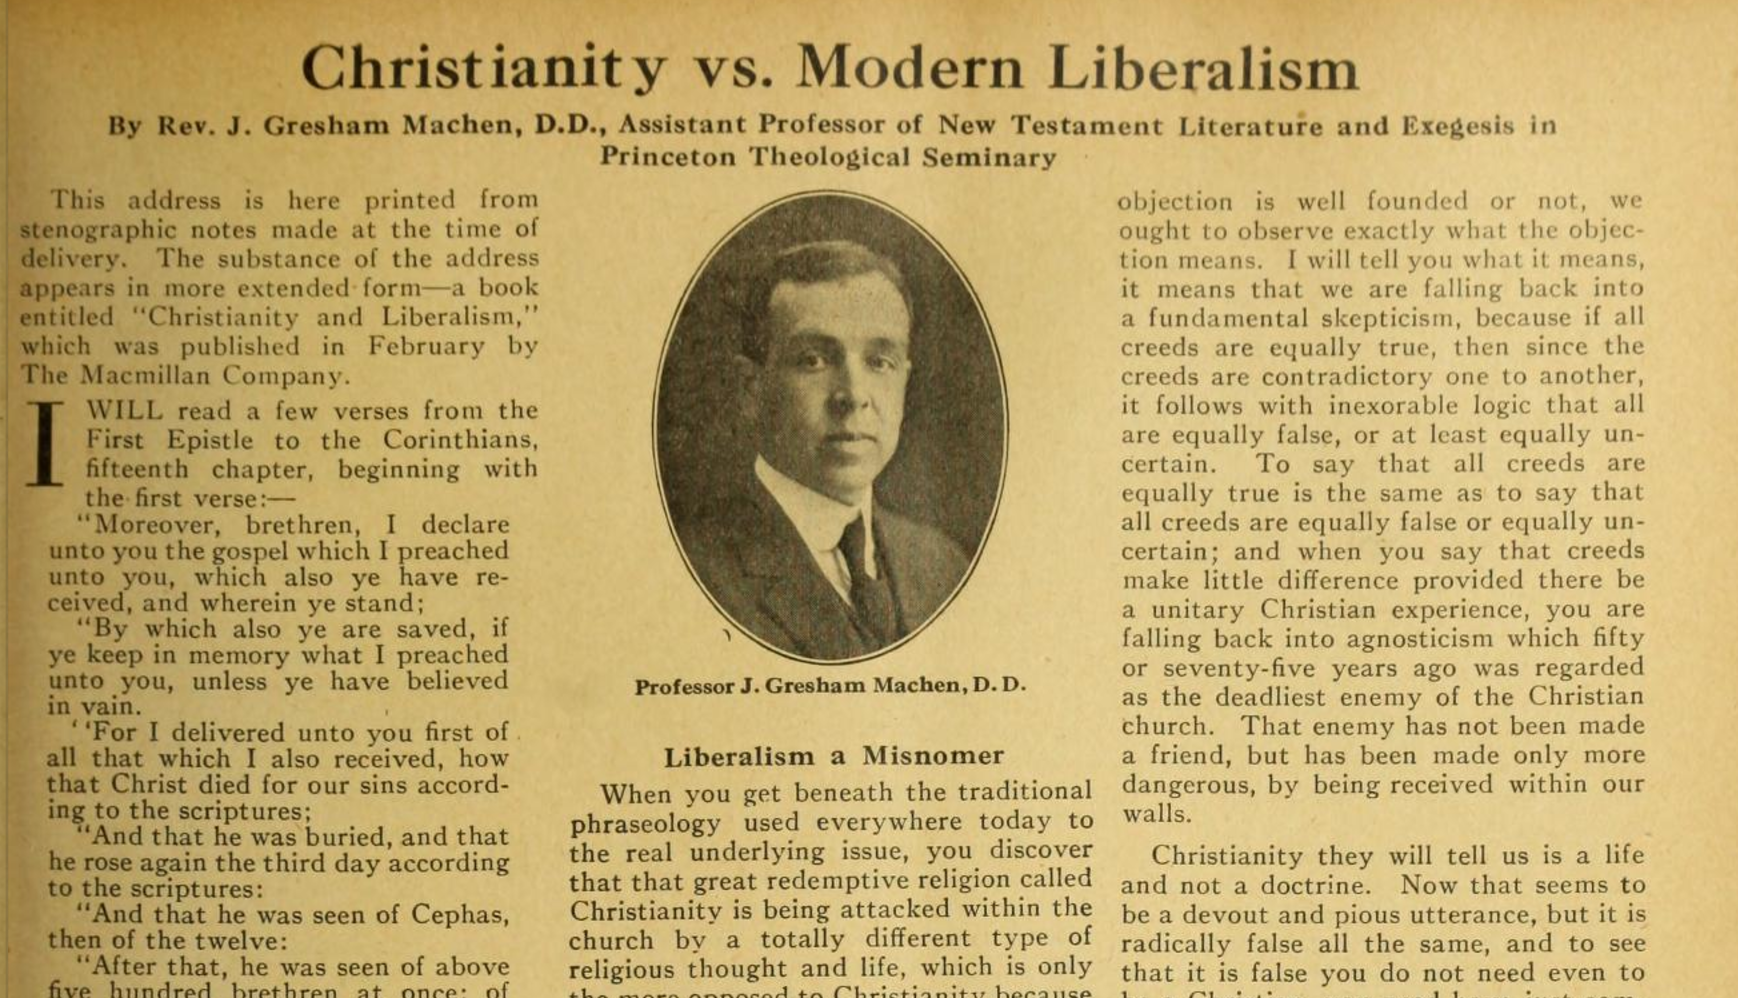 Full text of Machen's 1923 address at the Moody Institute Founders Conference.